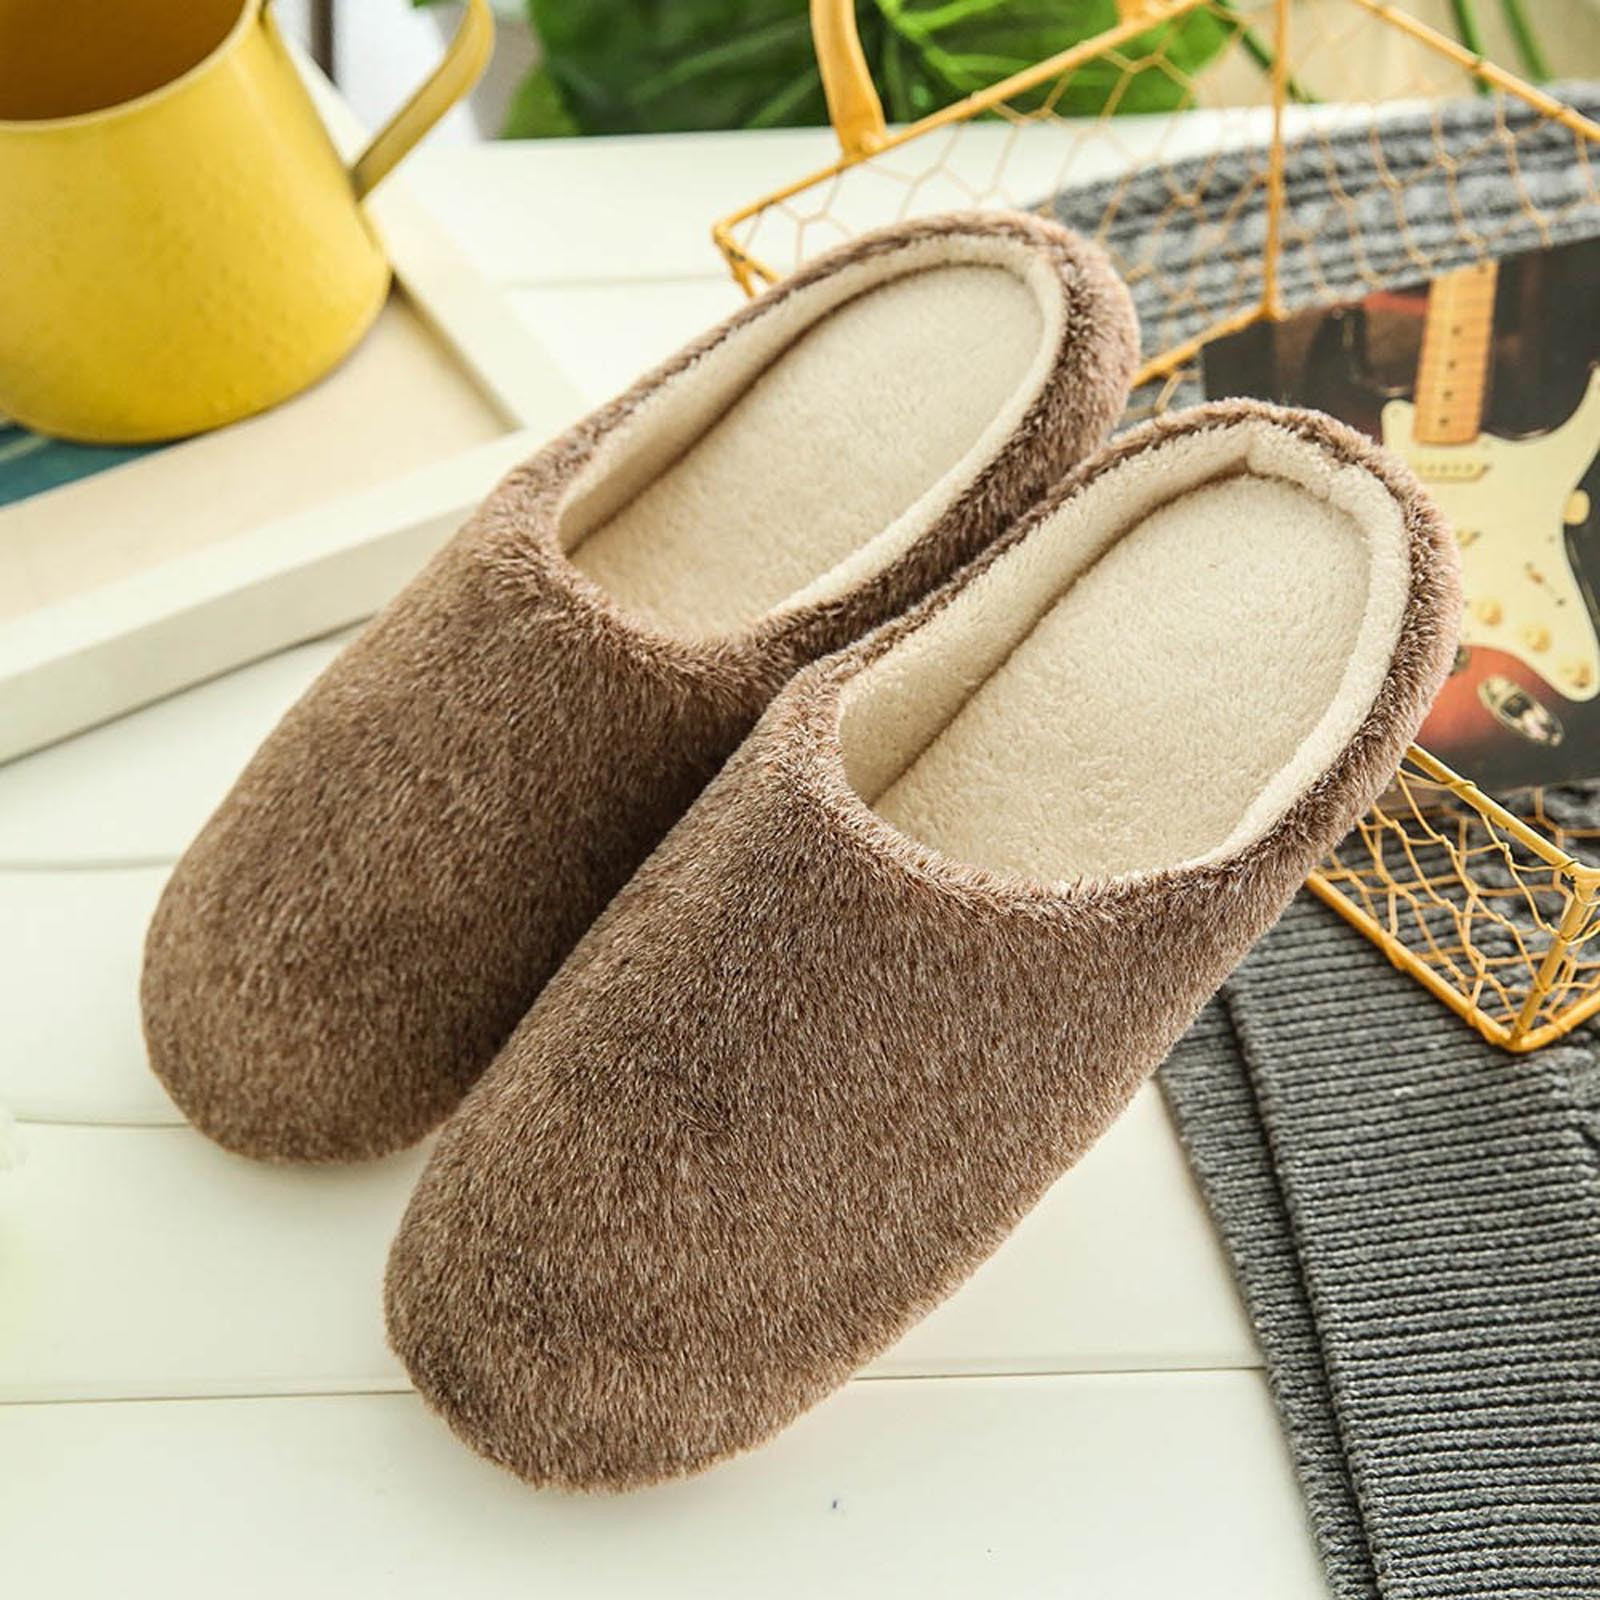 Chiccall Winter Warm Slippers, Comfy Solid Fuzzy Slippers Faux Fur ...